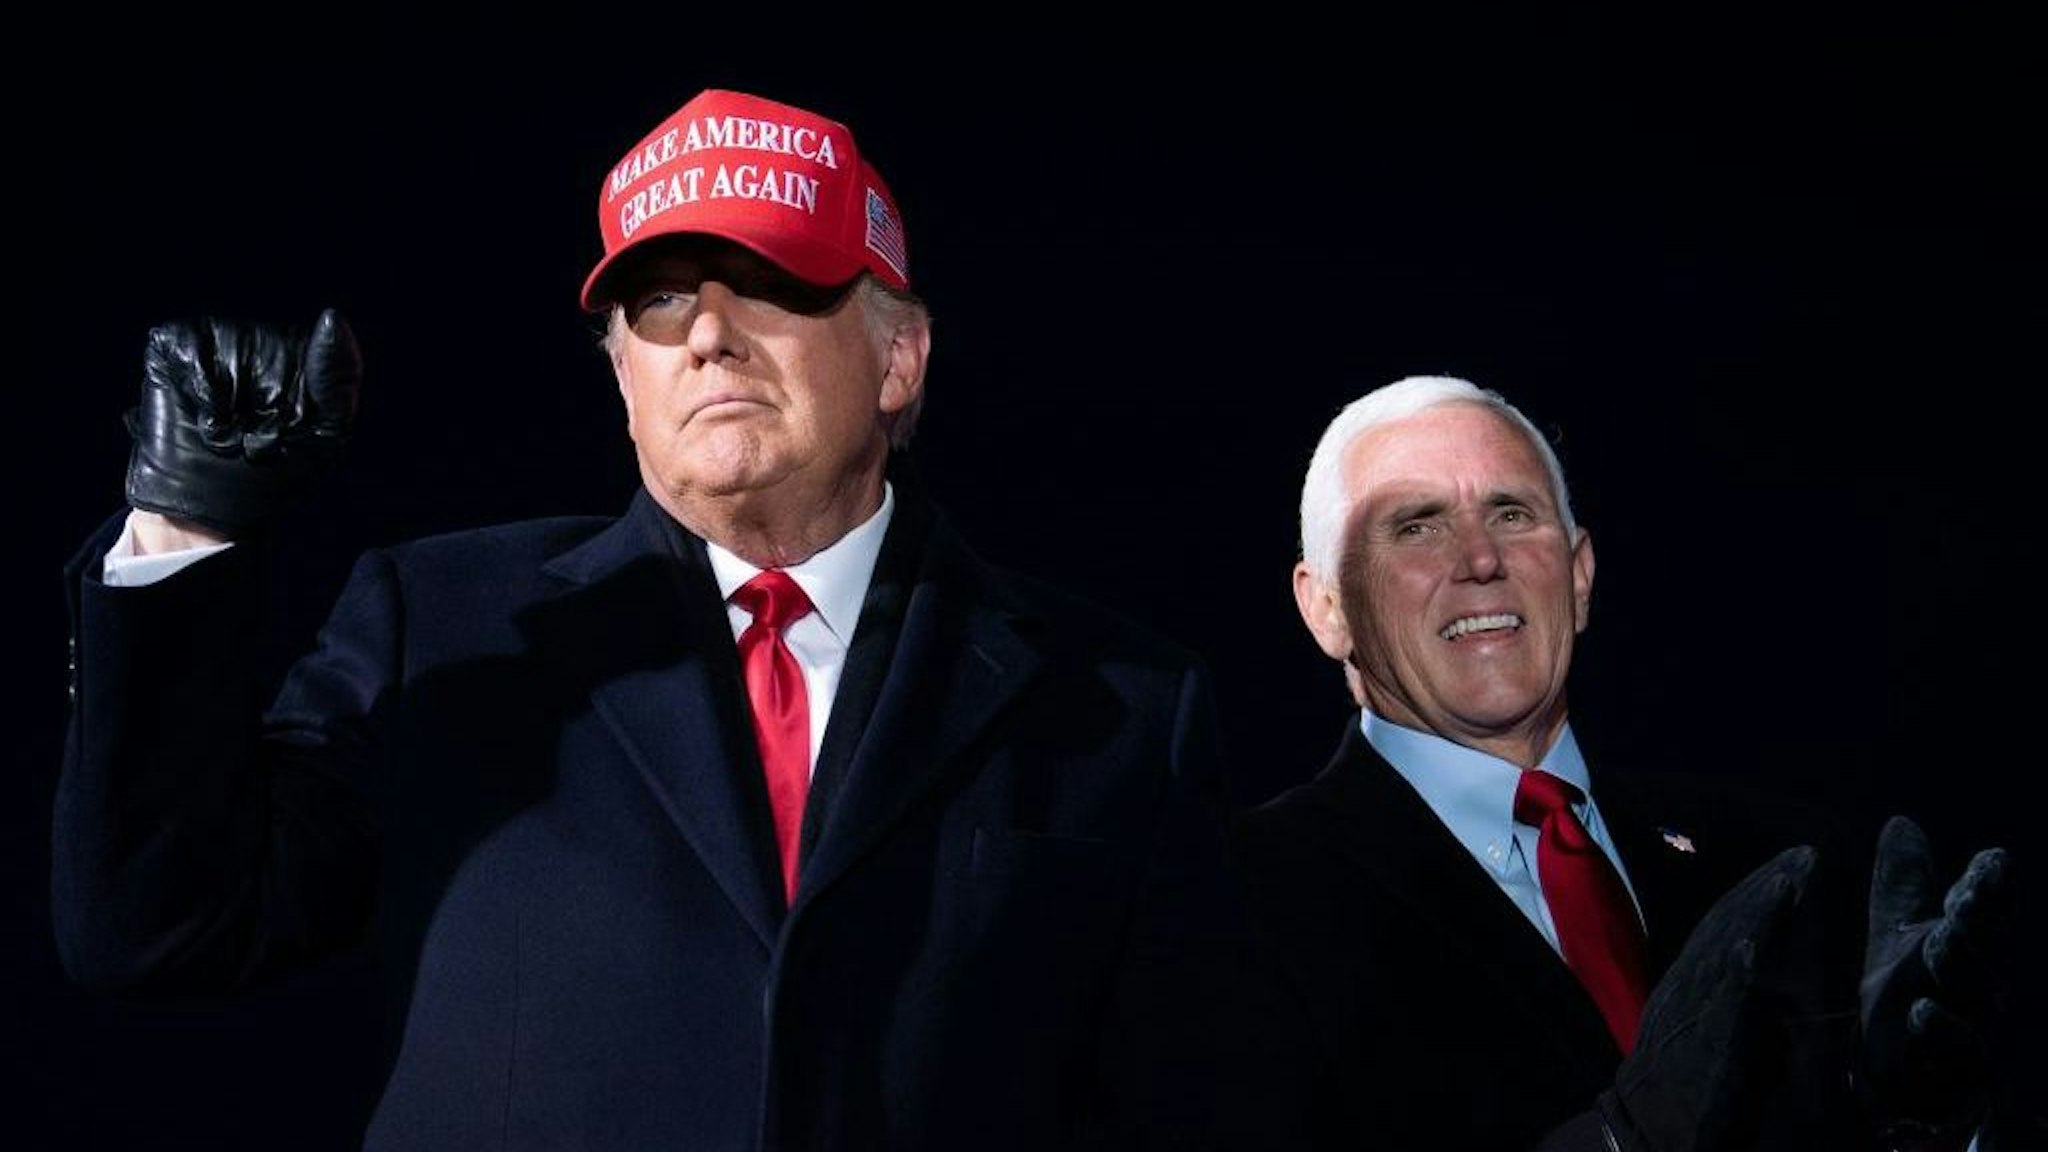 US President Donald Trump arrives with US Vice President Mike Pence for a Make America Great Again rally at Cherry Capital Airport in Traverse City, Michigan on November 2, 2020. (Photo by Brendan Smialowski / AFP) (Photo by BRENDAN SMIALOWSKI/AFP via Getty Images)